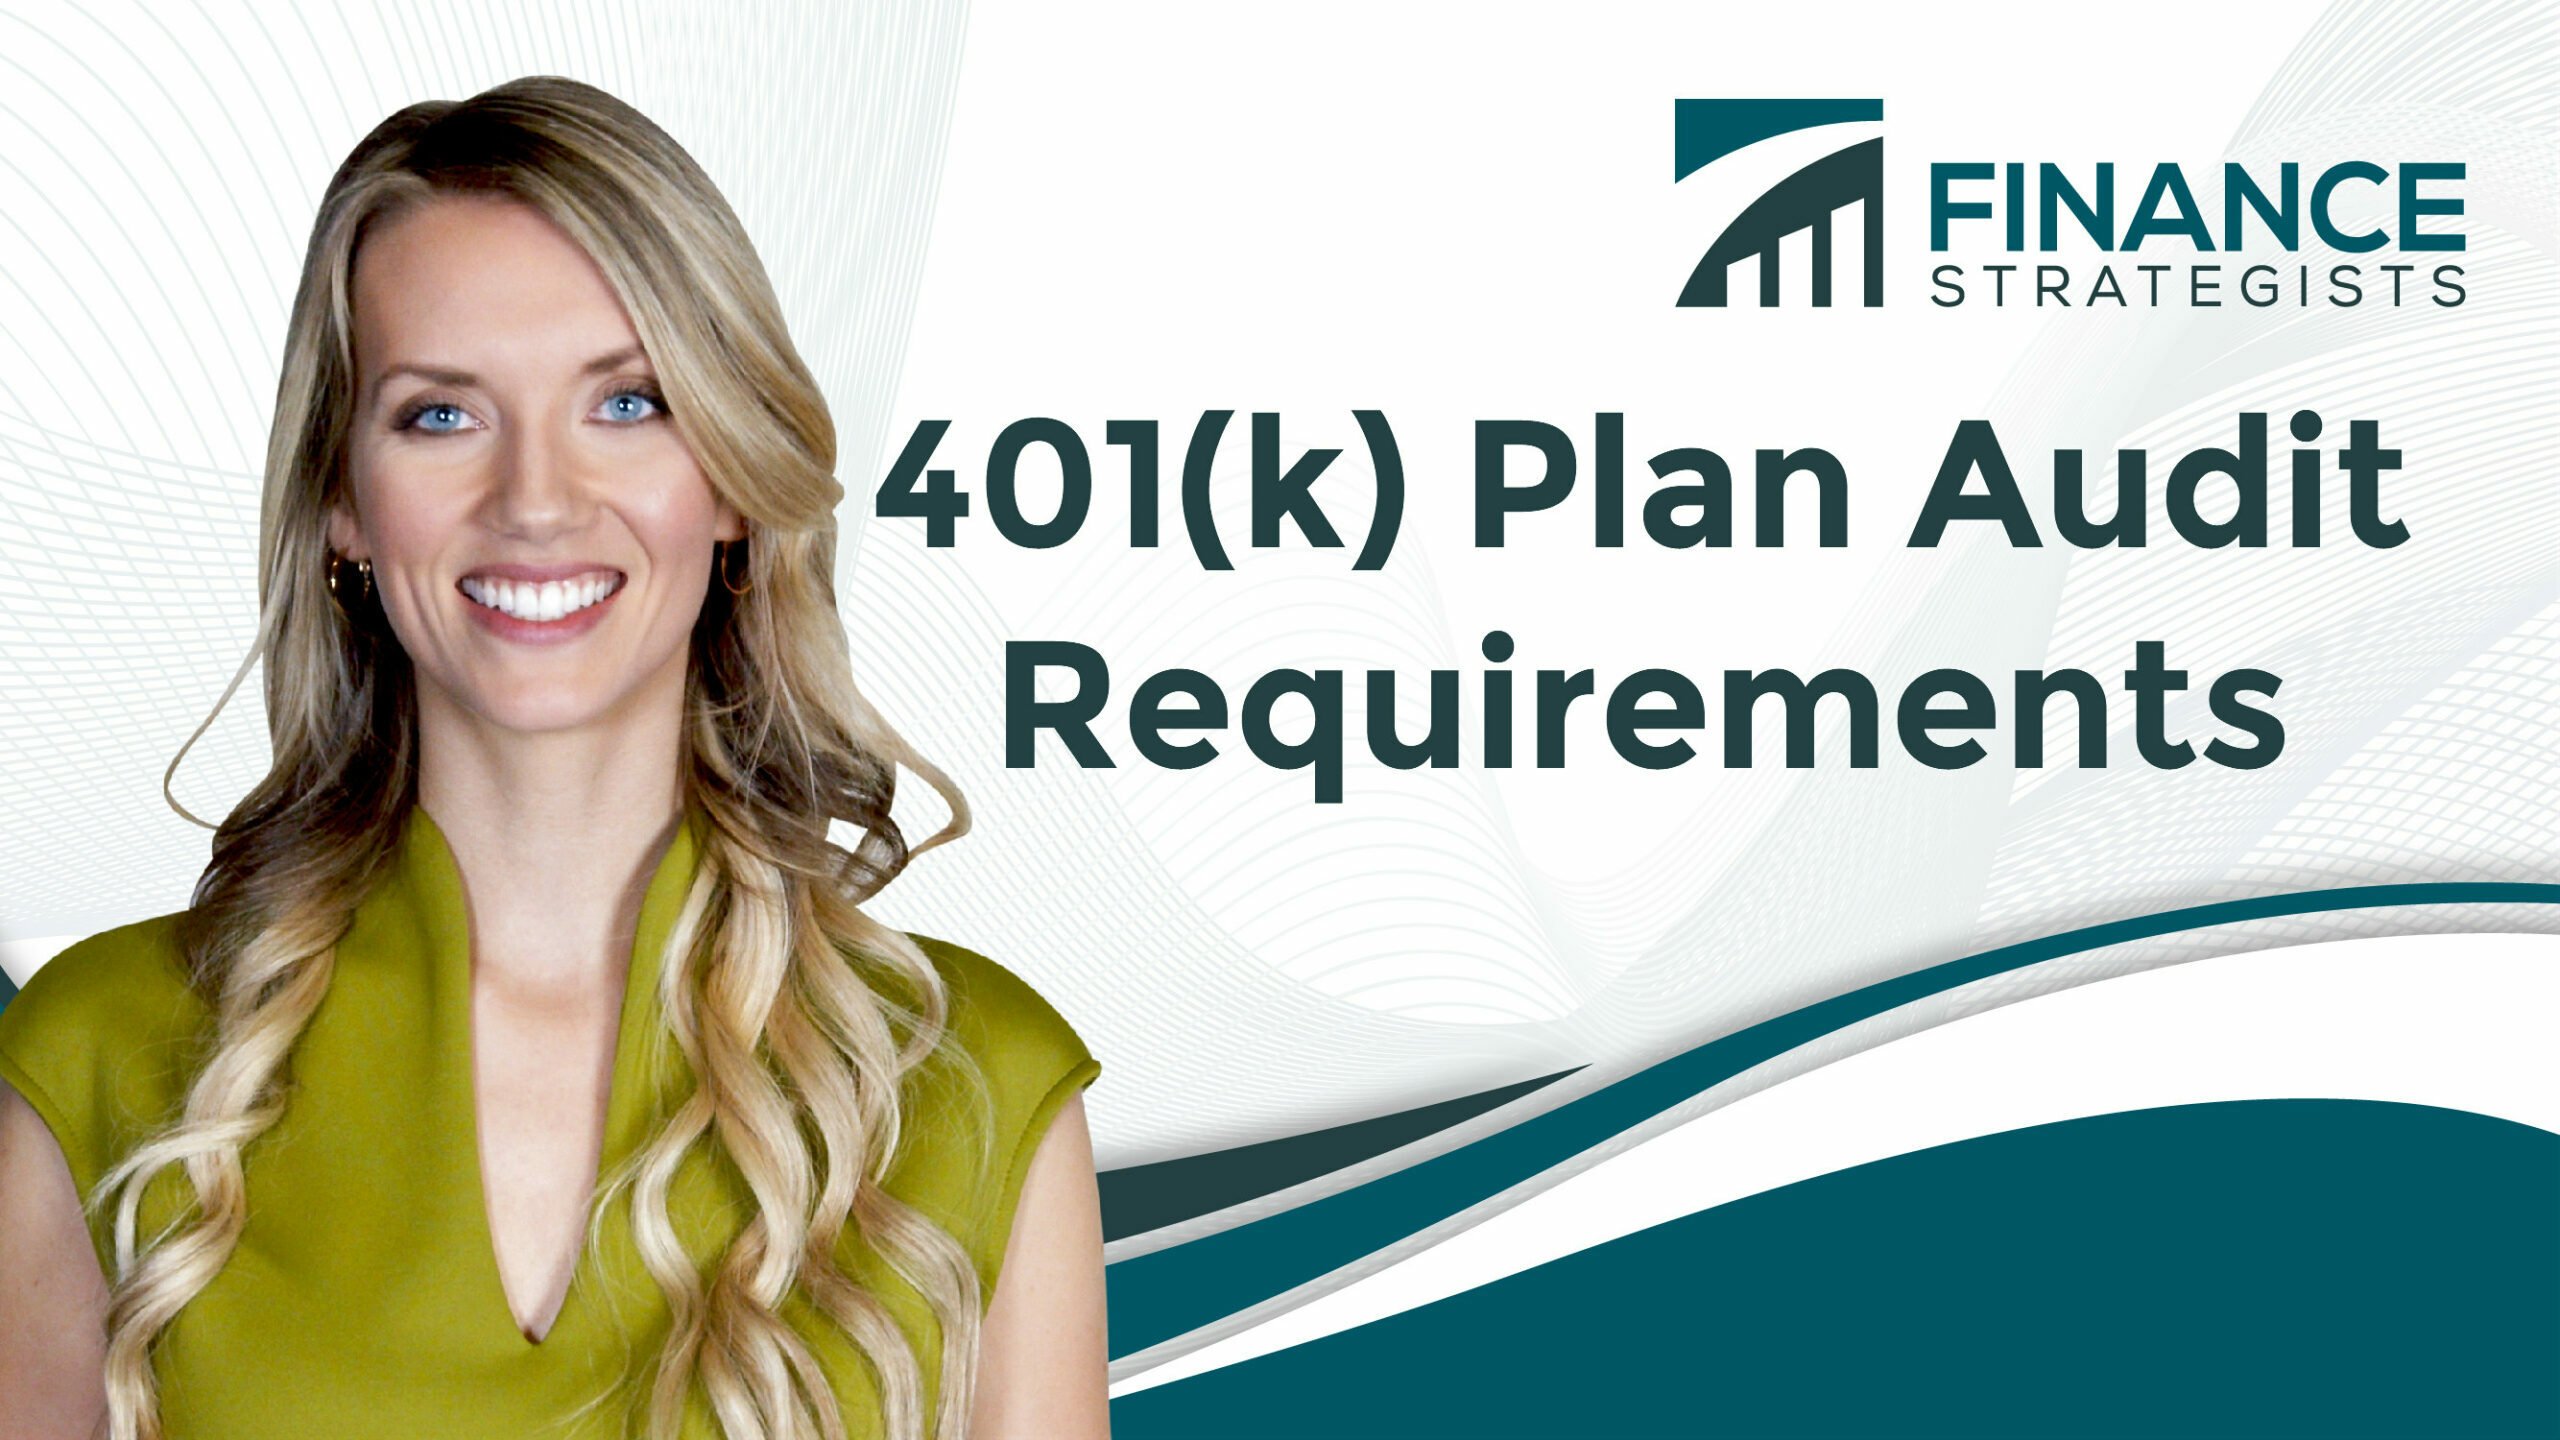 401(k) Plan Audit Definition, Types, Scope, Requirements, Tips